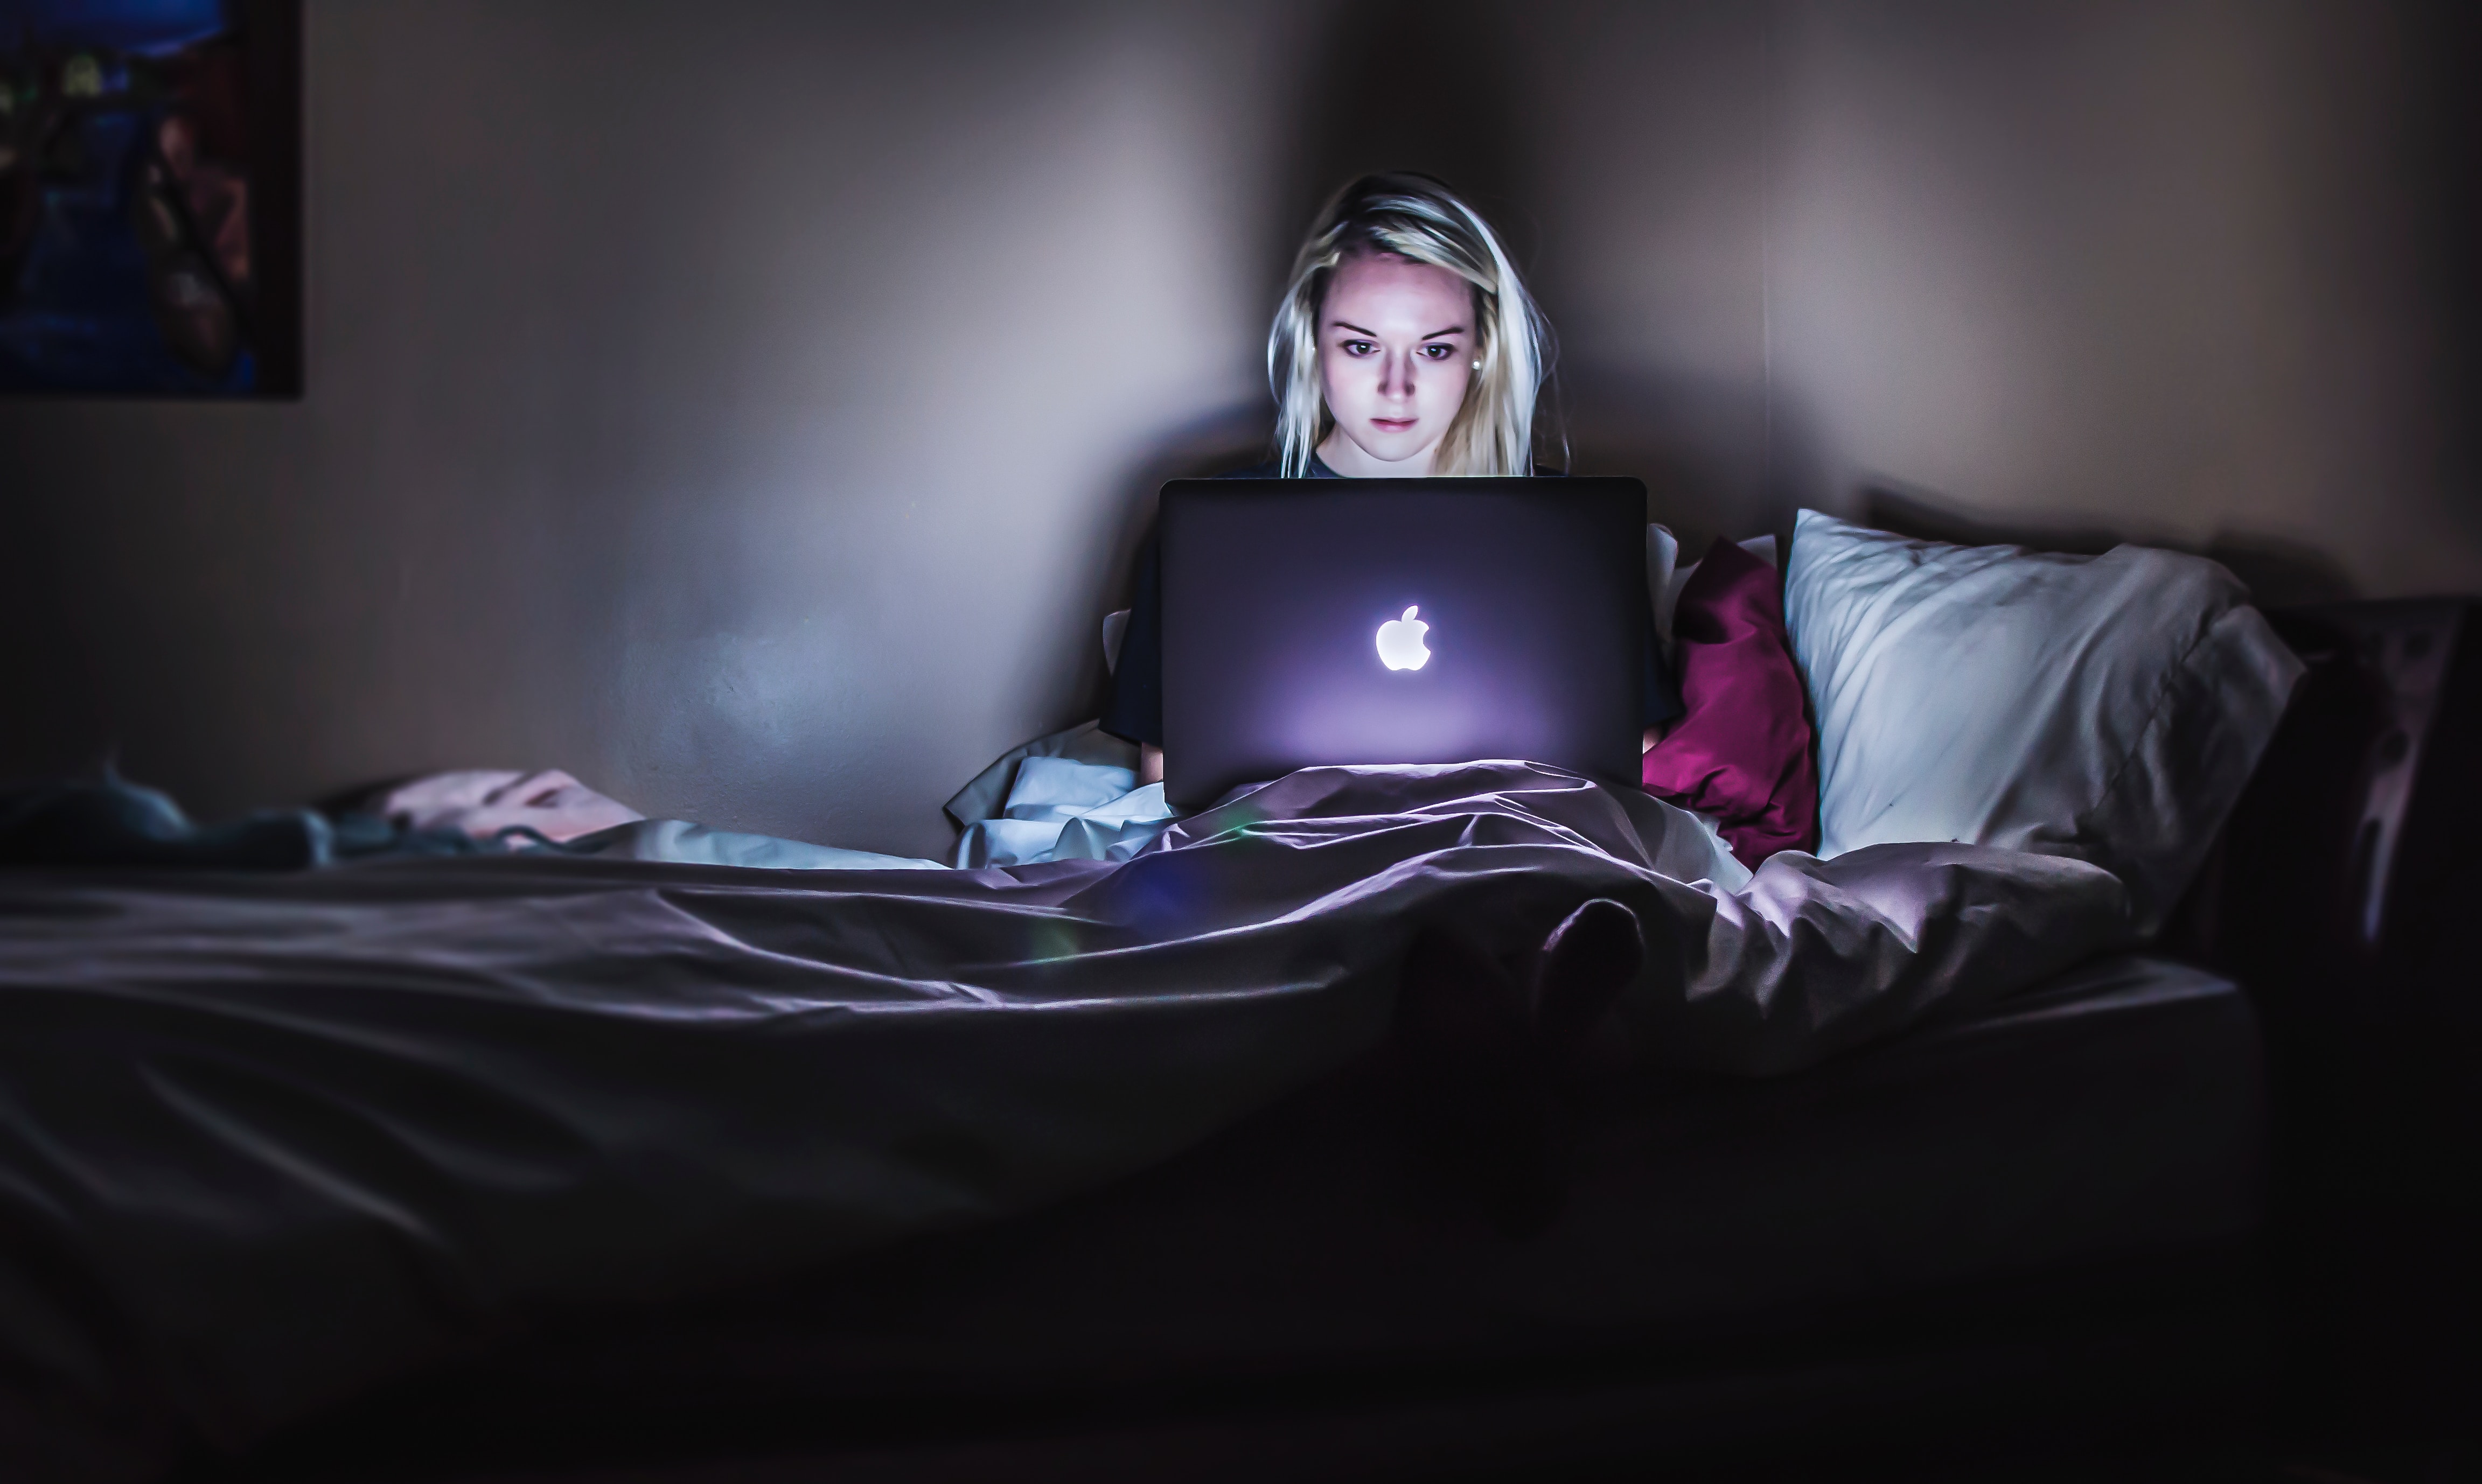 Girl on computer late at night